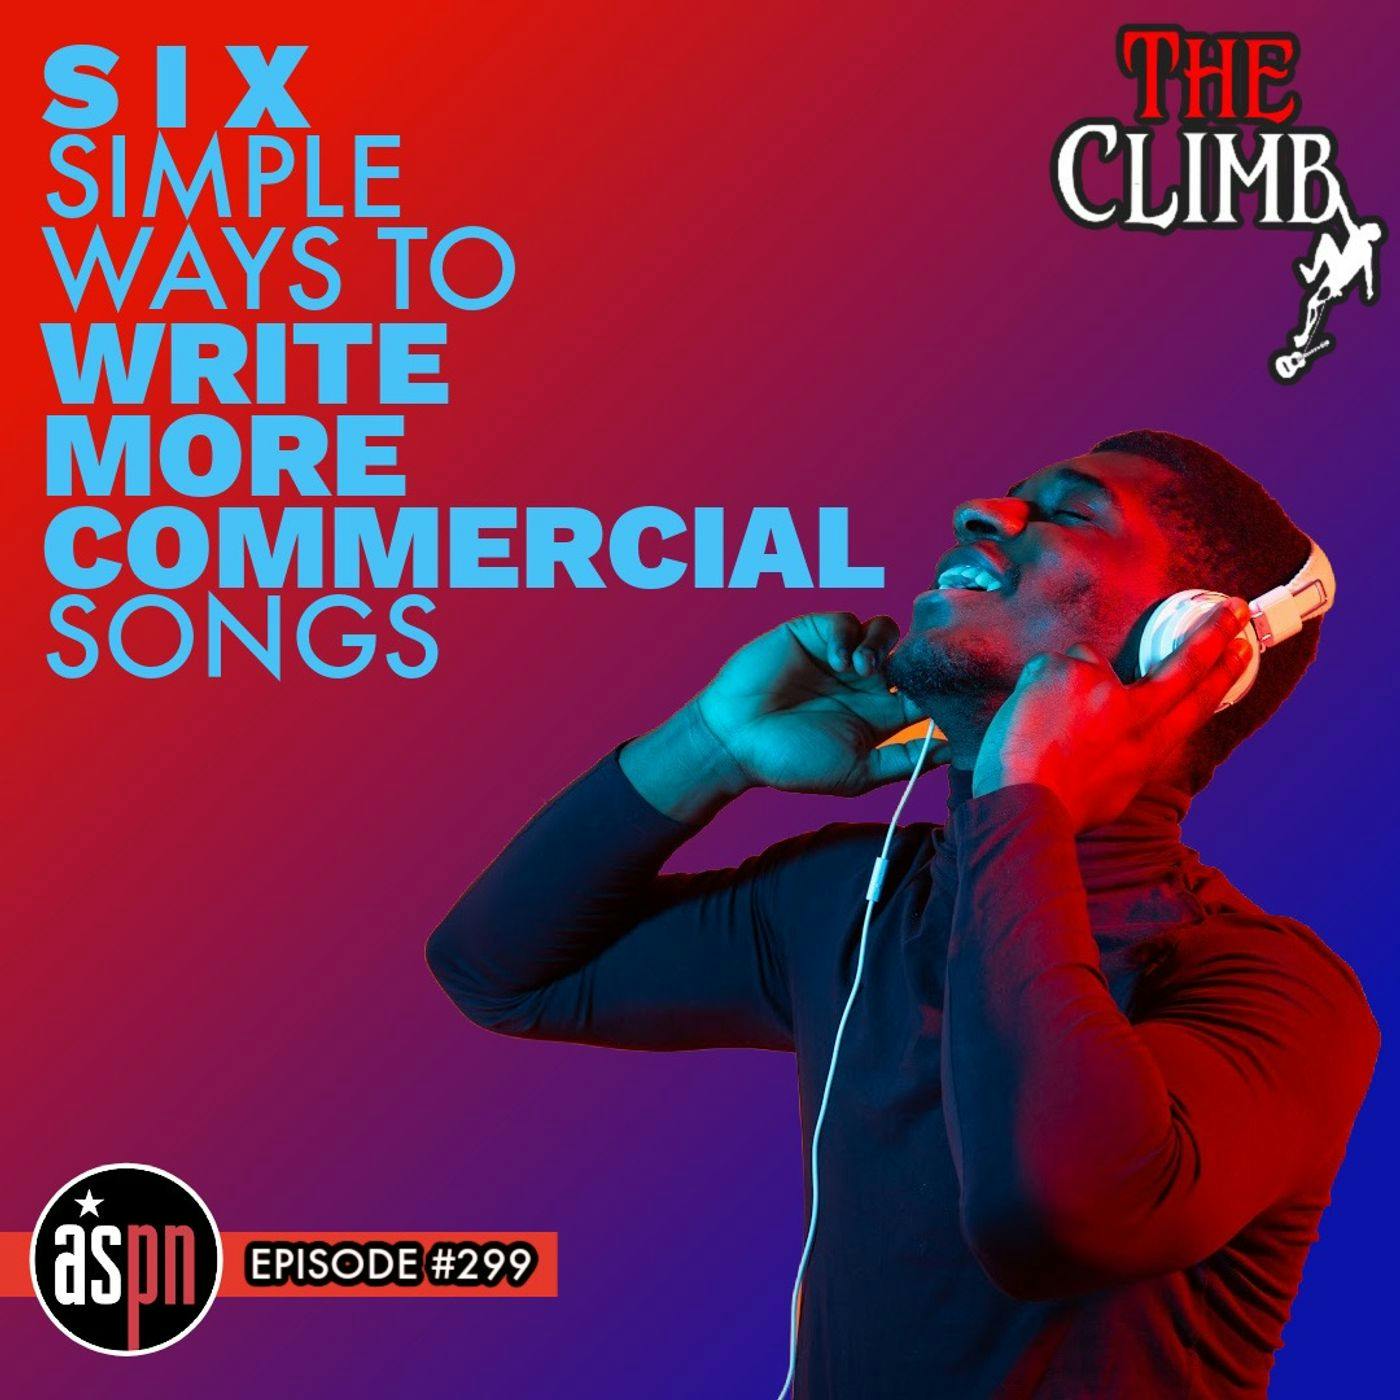 Episode #299: Six Simple Ways To Write More Commercial Songs